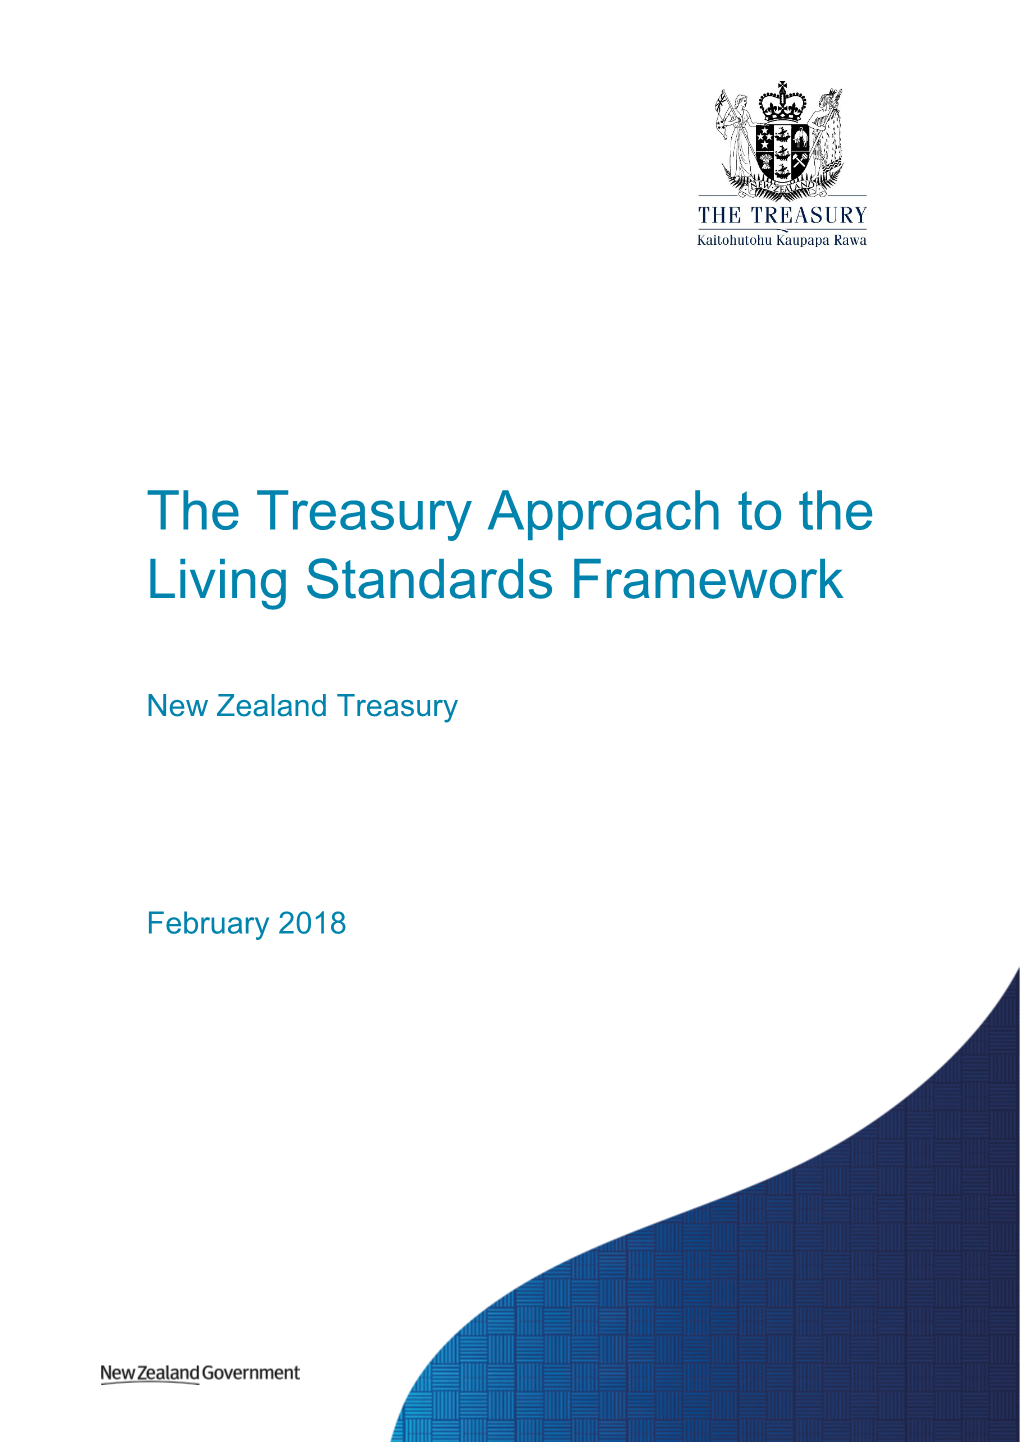 The Treasury Approach to the Living Standards Framework